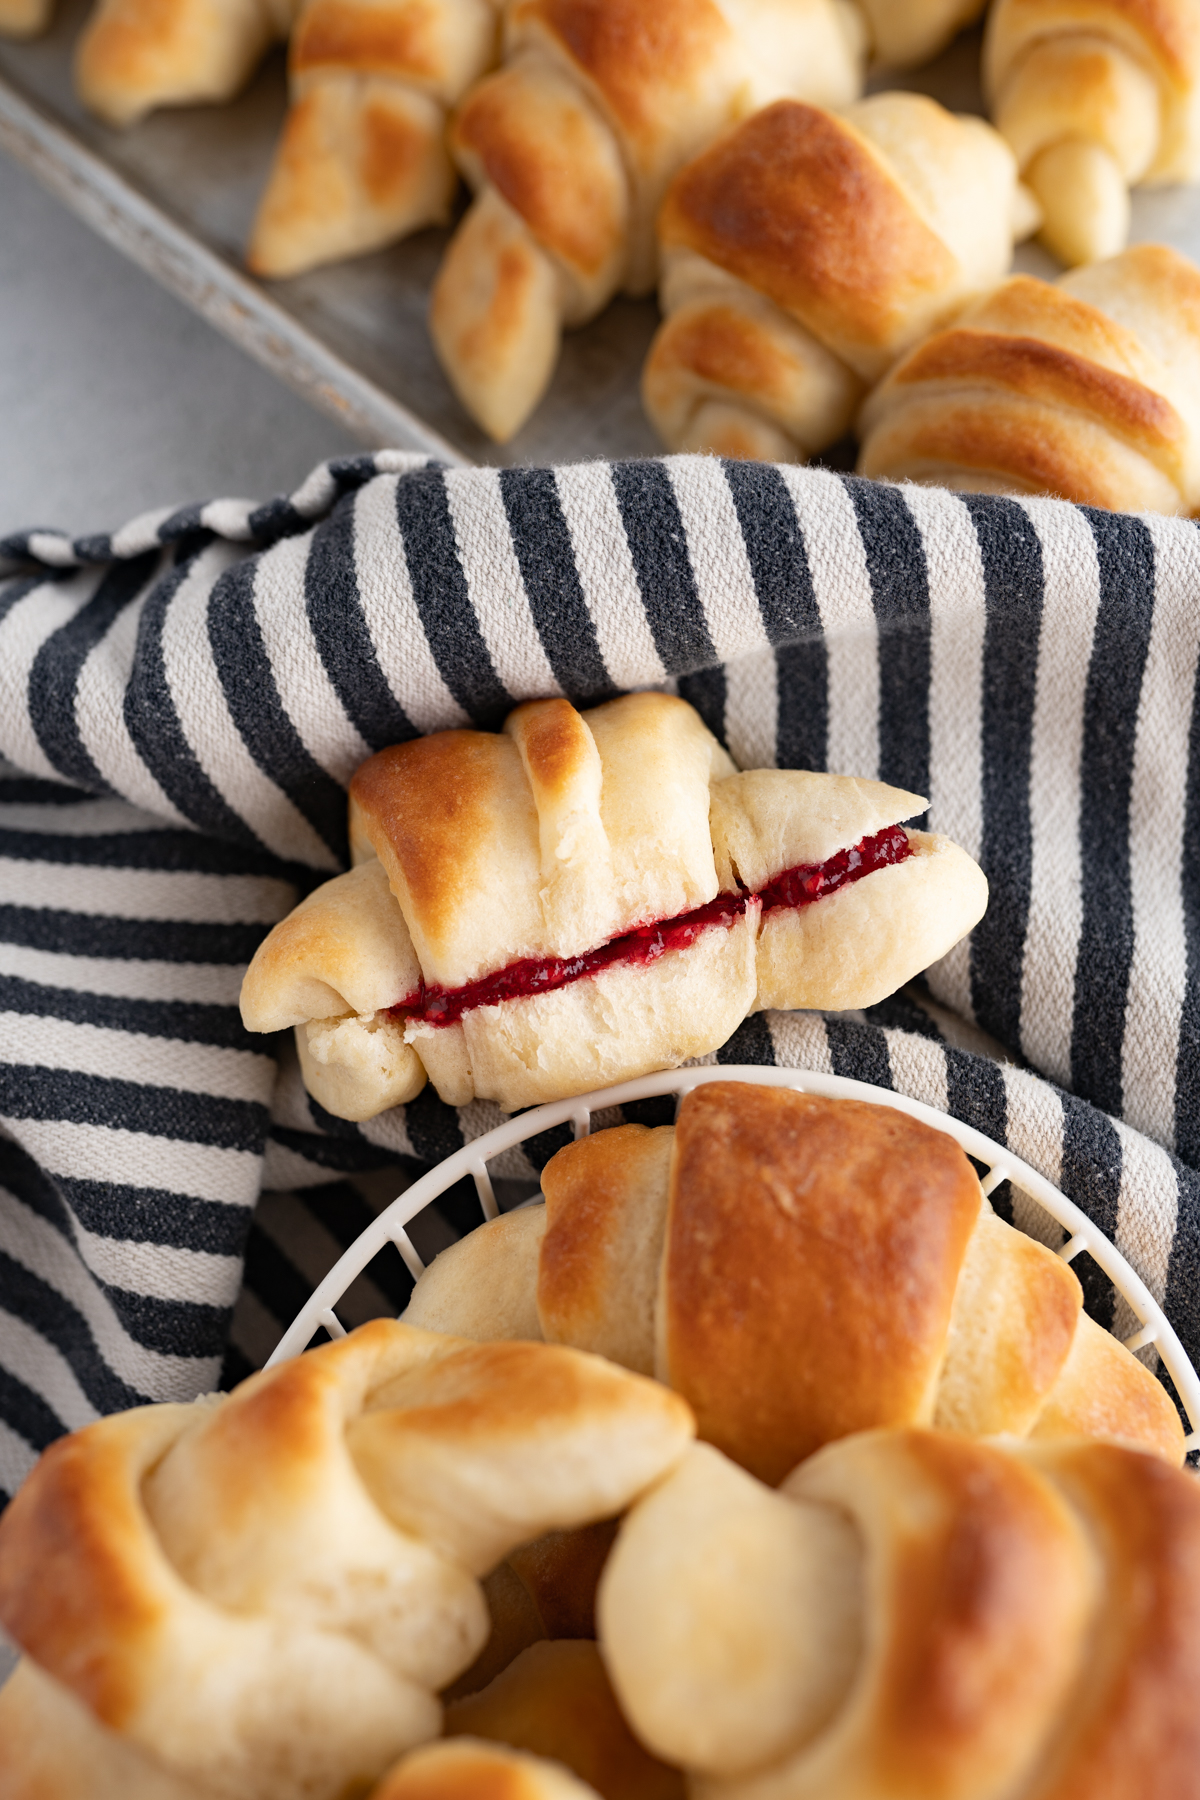 A crescent roll cut in half and filled with jam.